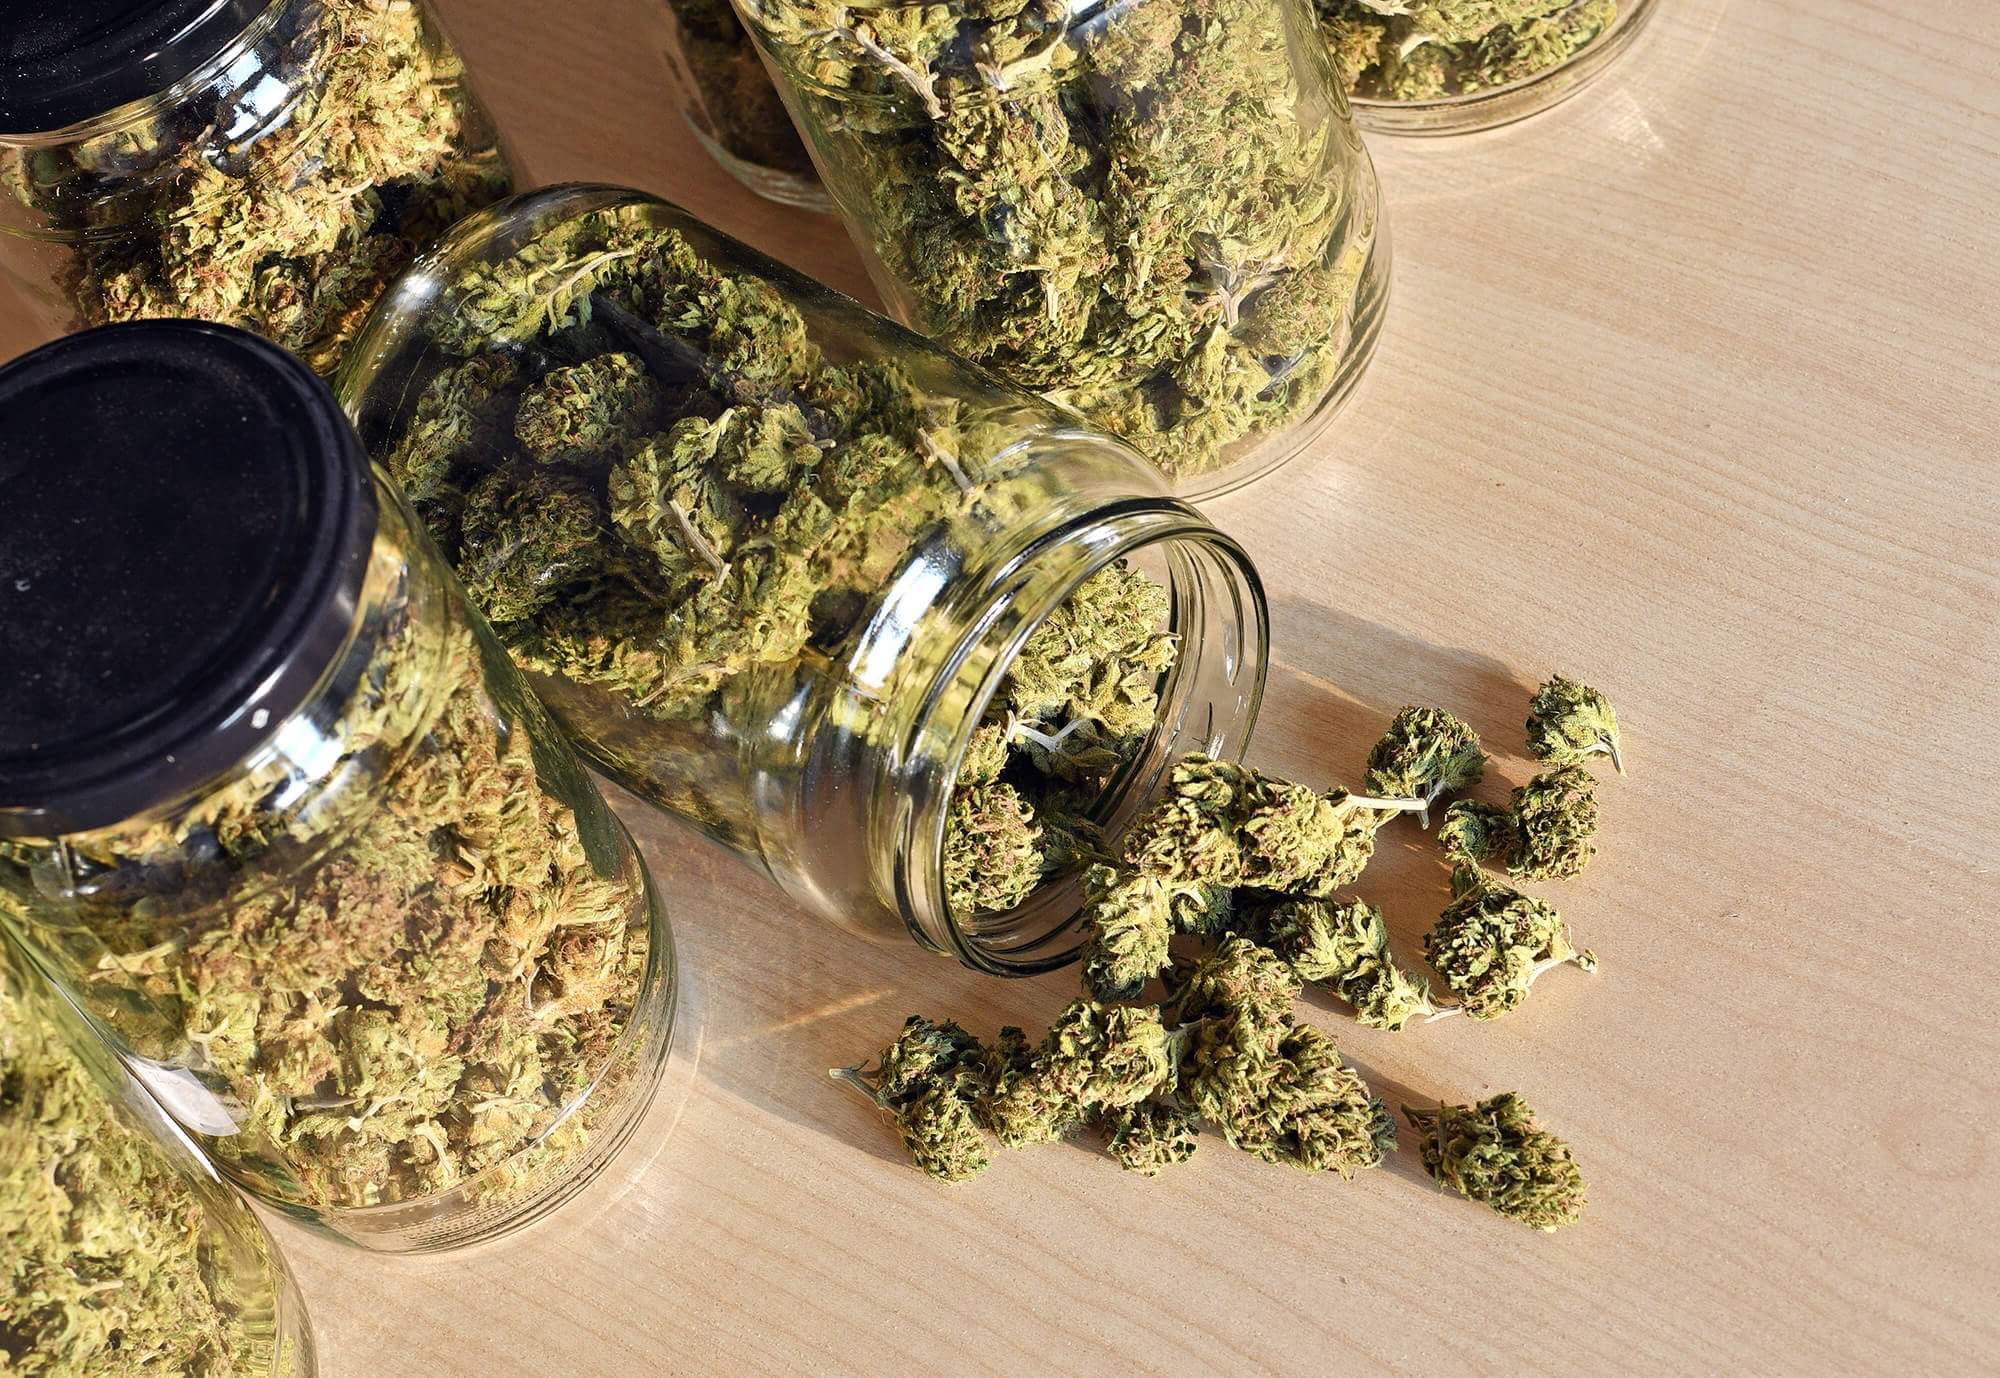 dry-and-trimmed-cannabis-buds-stored-in-a-glas-jar-PP4THVA-1-e1634563958624.jpg